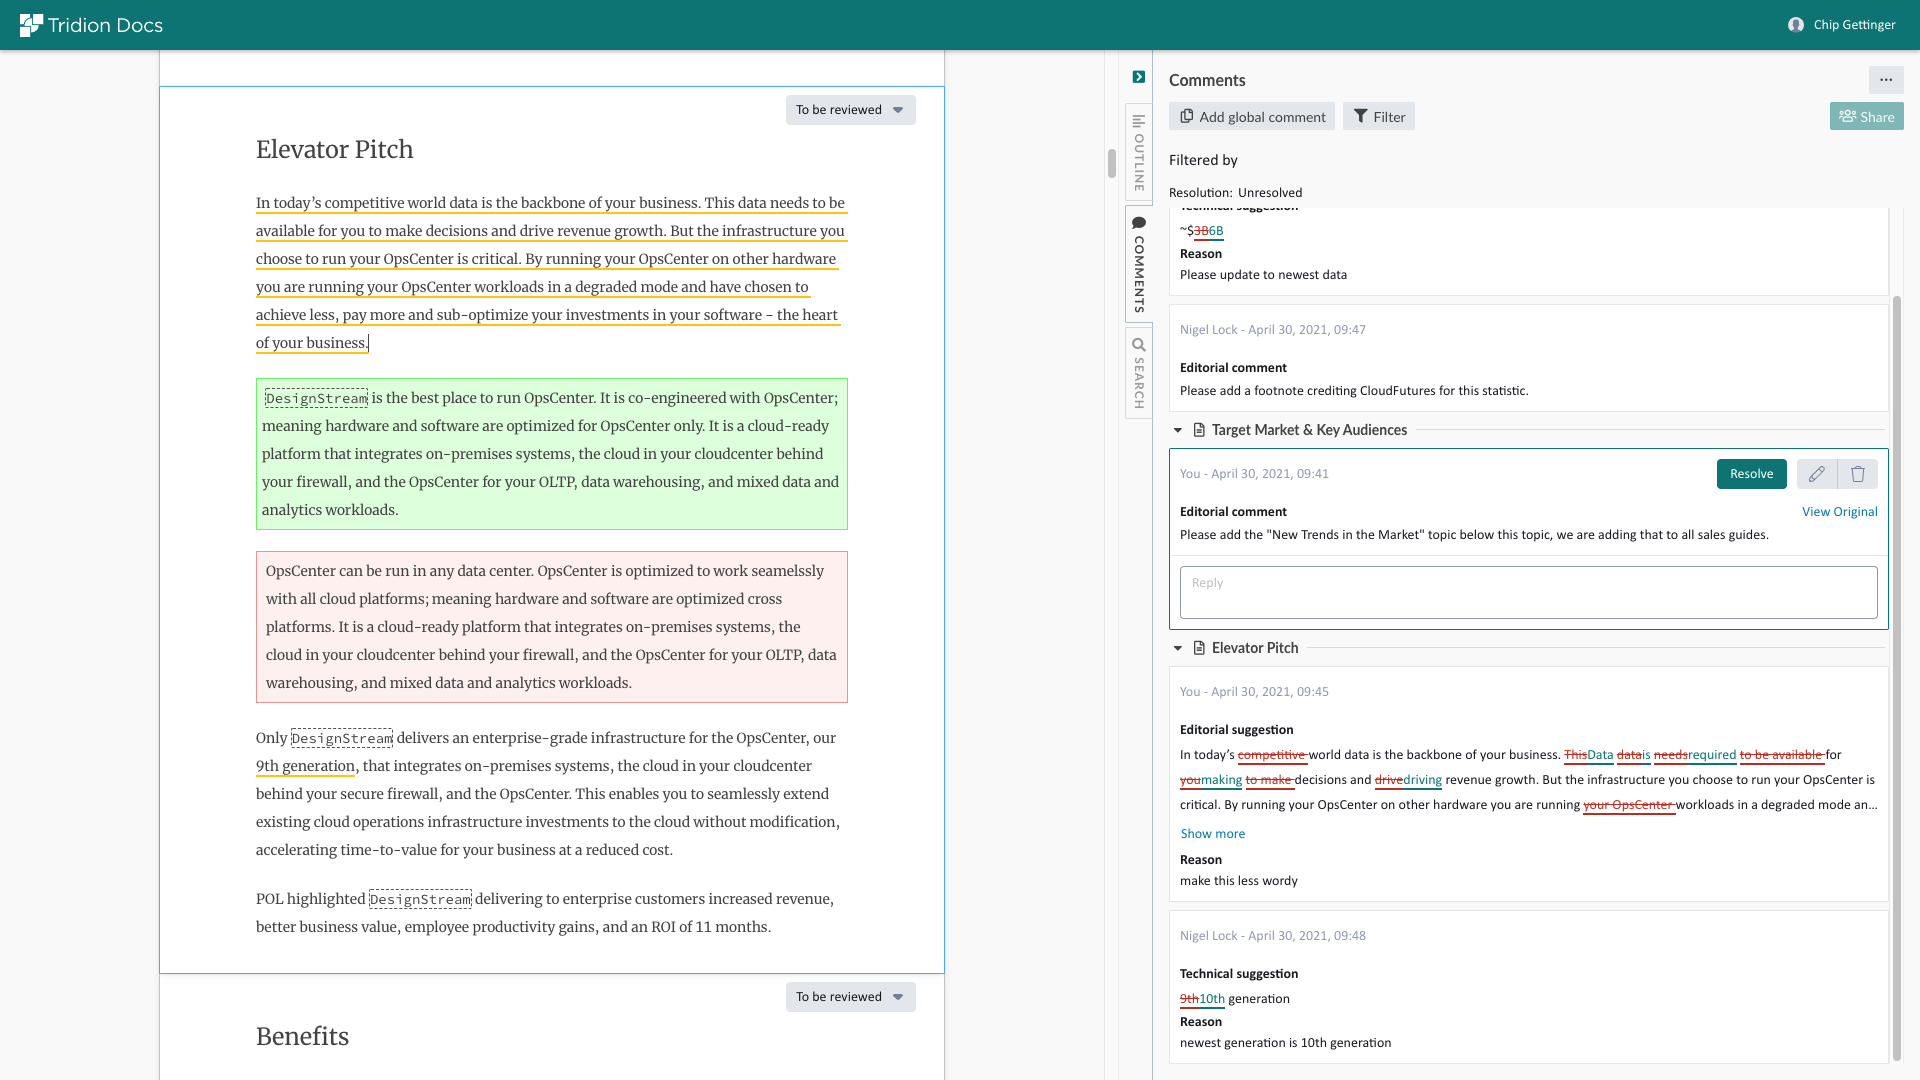 Subject matter experts and reviewers use the Review Space module to collaborate on content within an intuitive interface. This tool presents reviewers with a comments panel showing feedback and collaboration from other people.